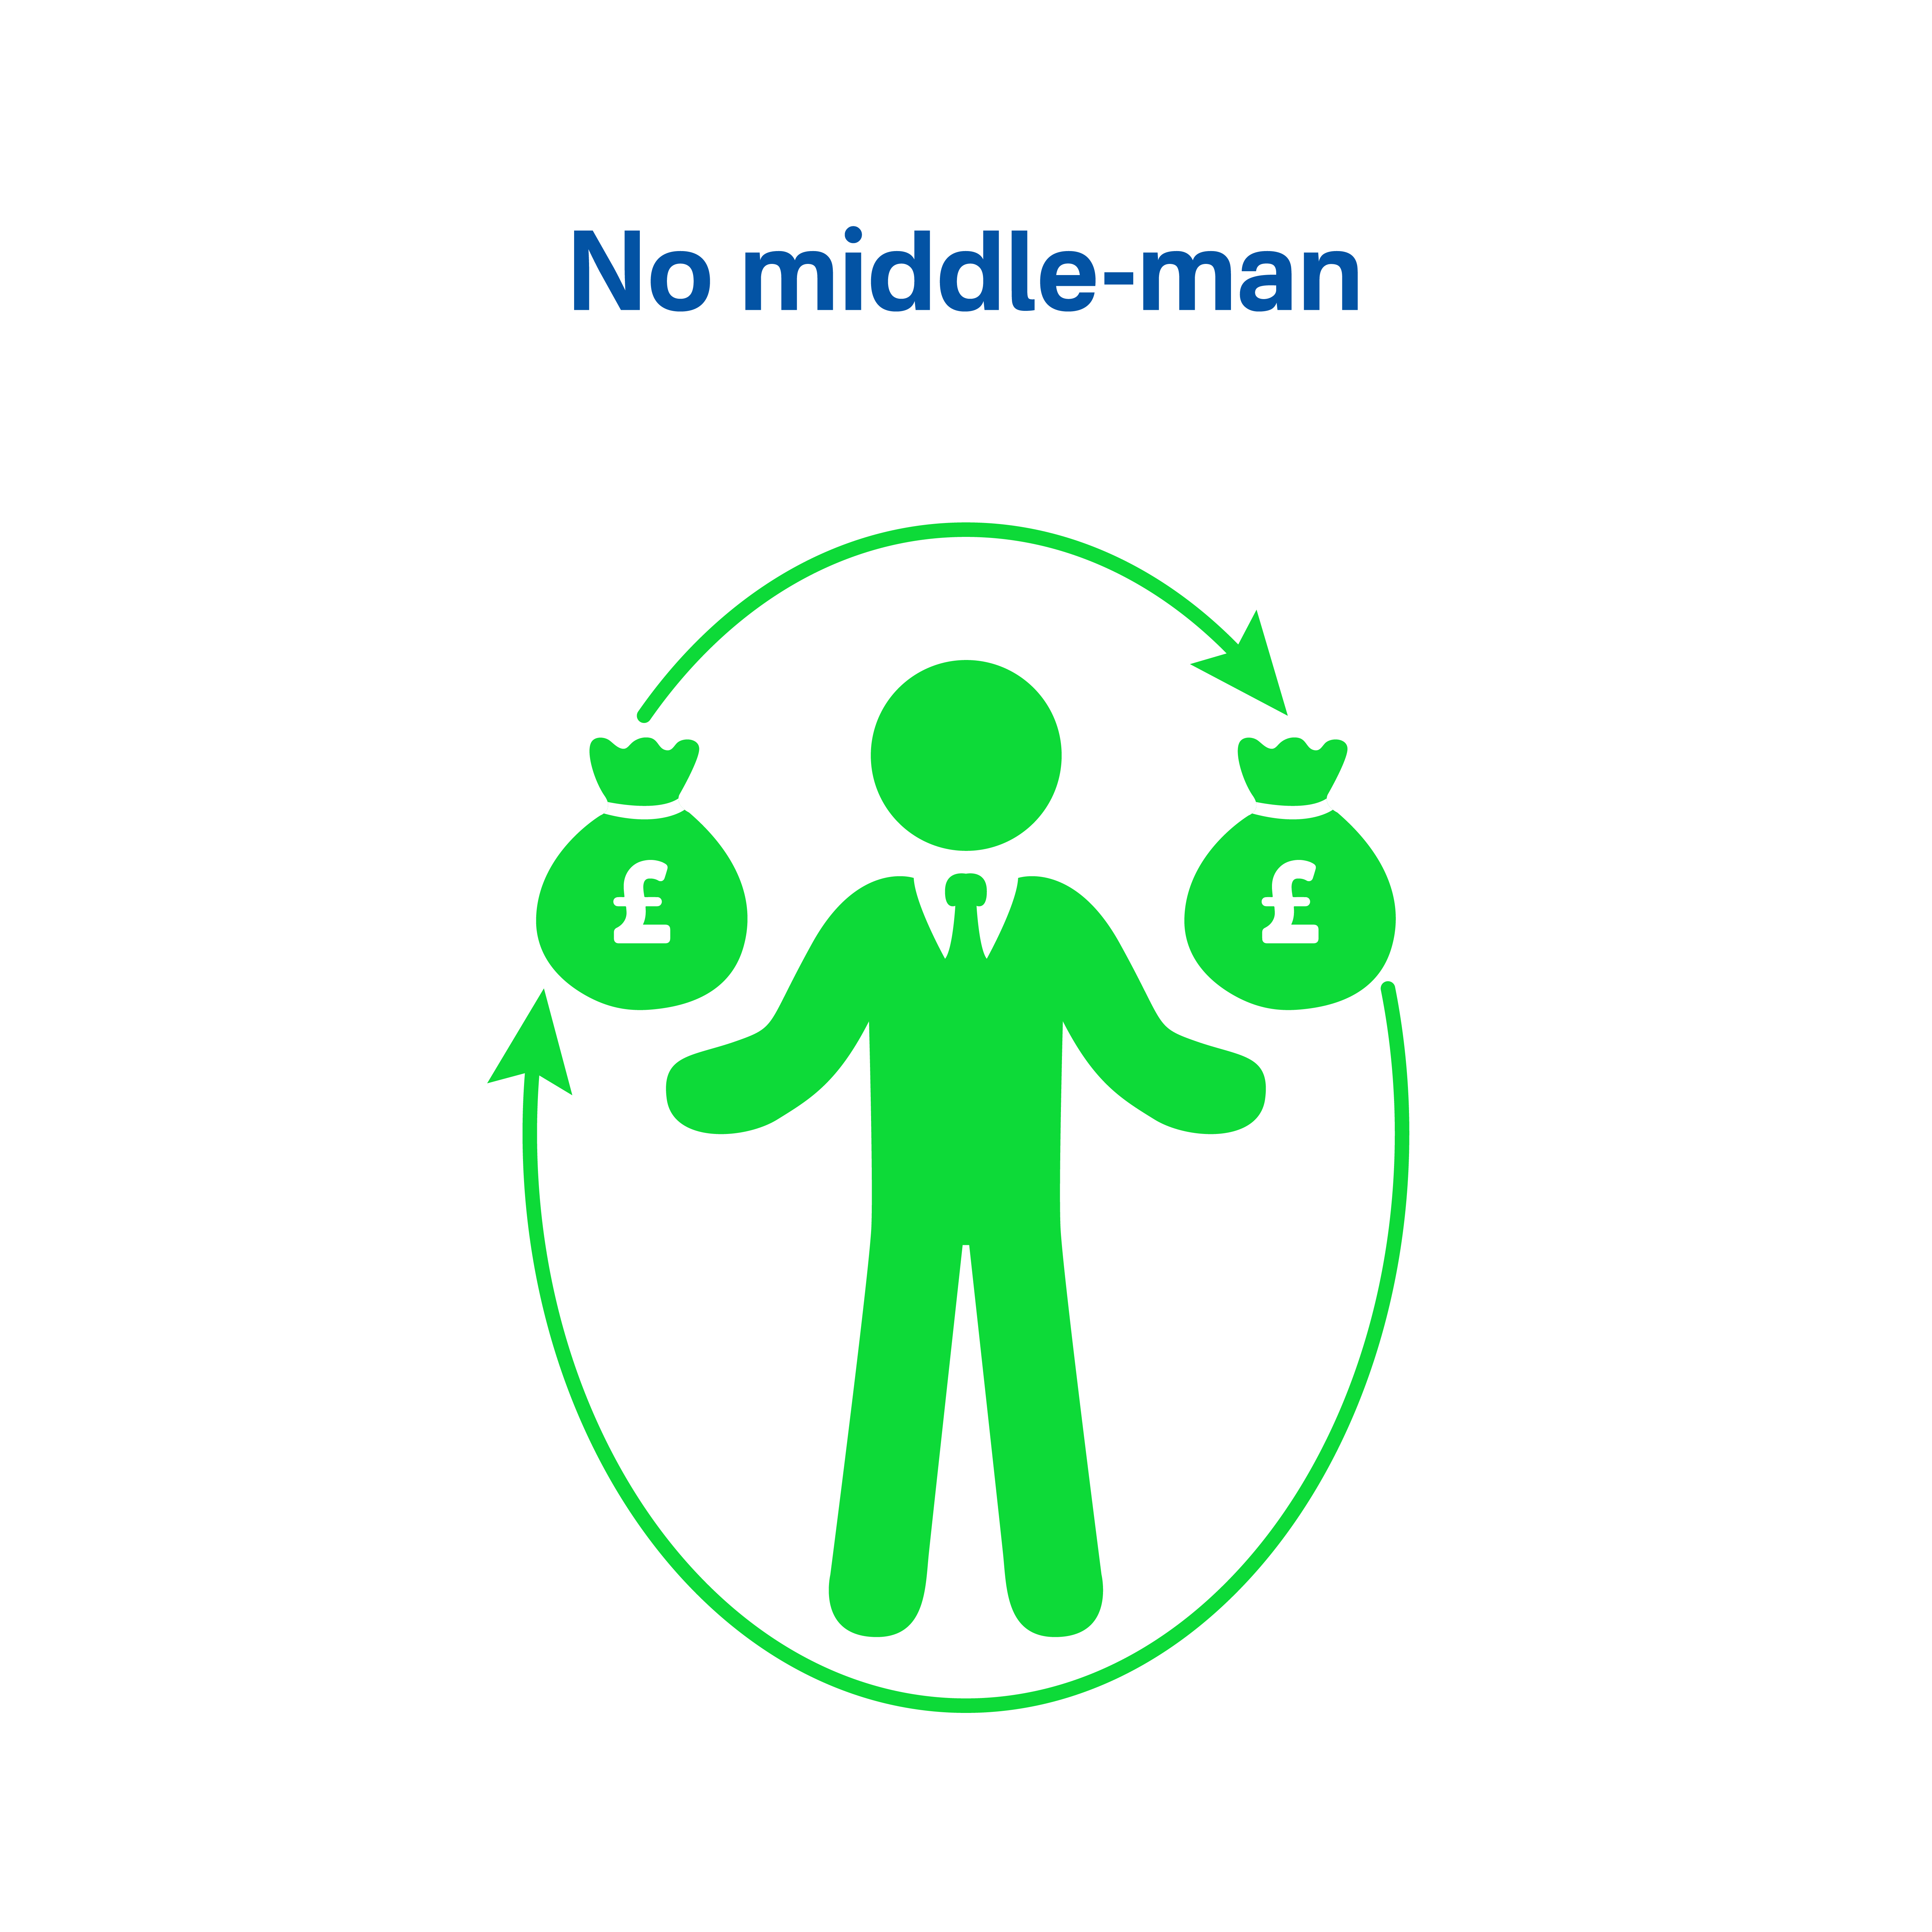 No middle-man